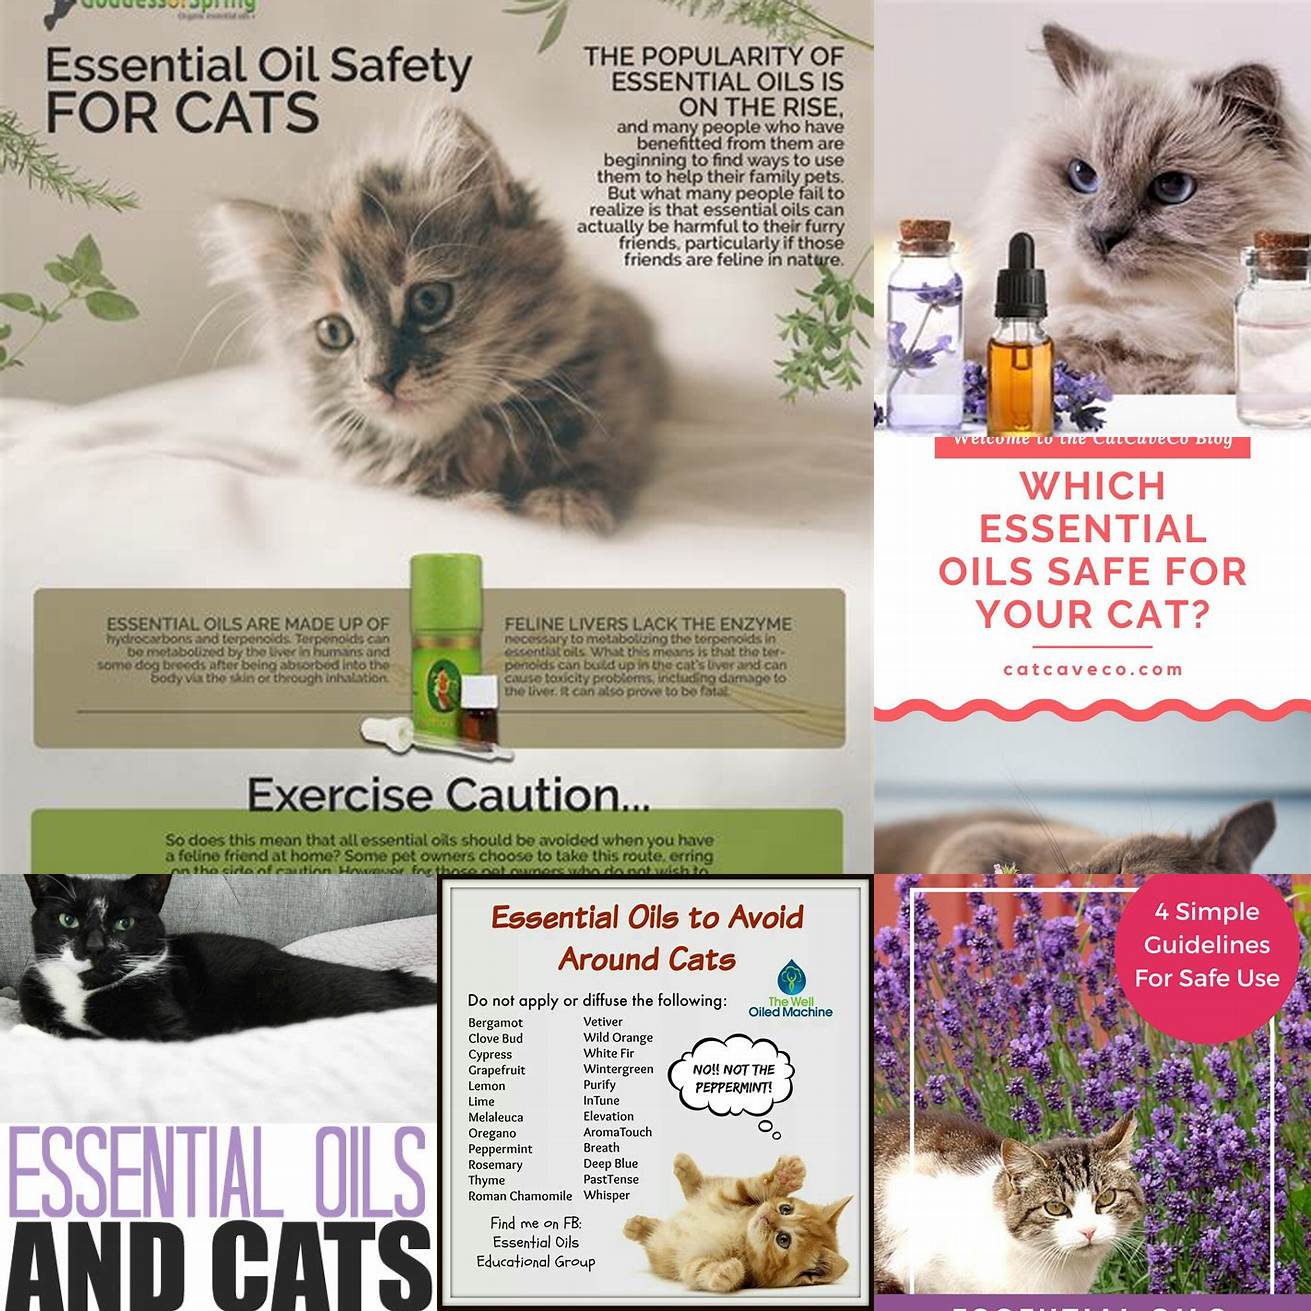 Avoid using concentrated essential oils around your cat